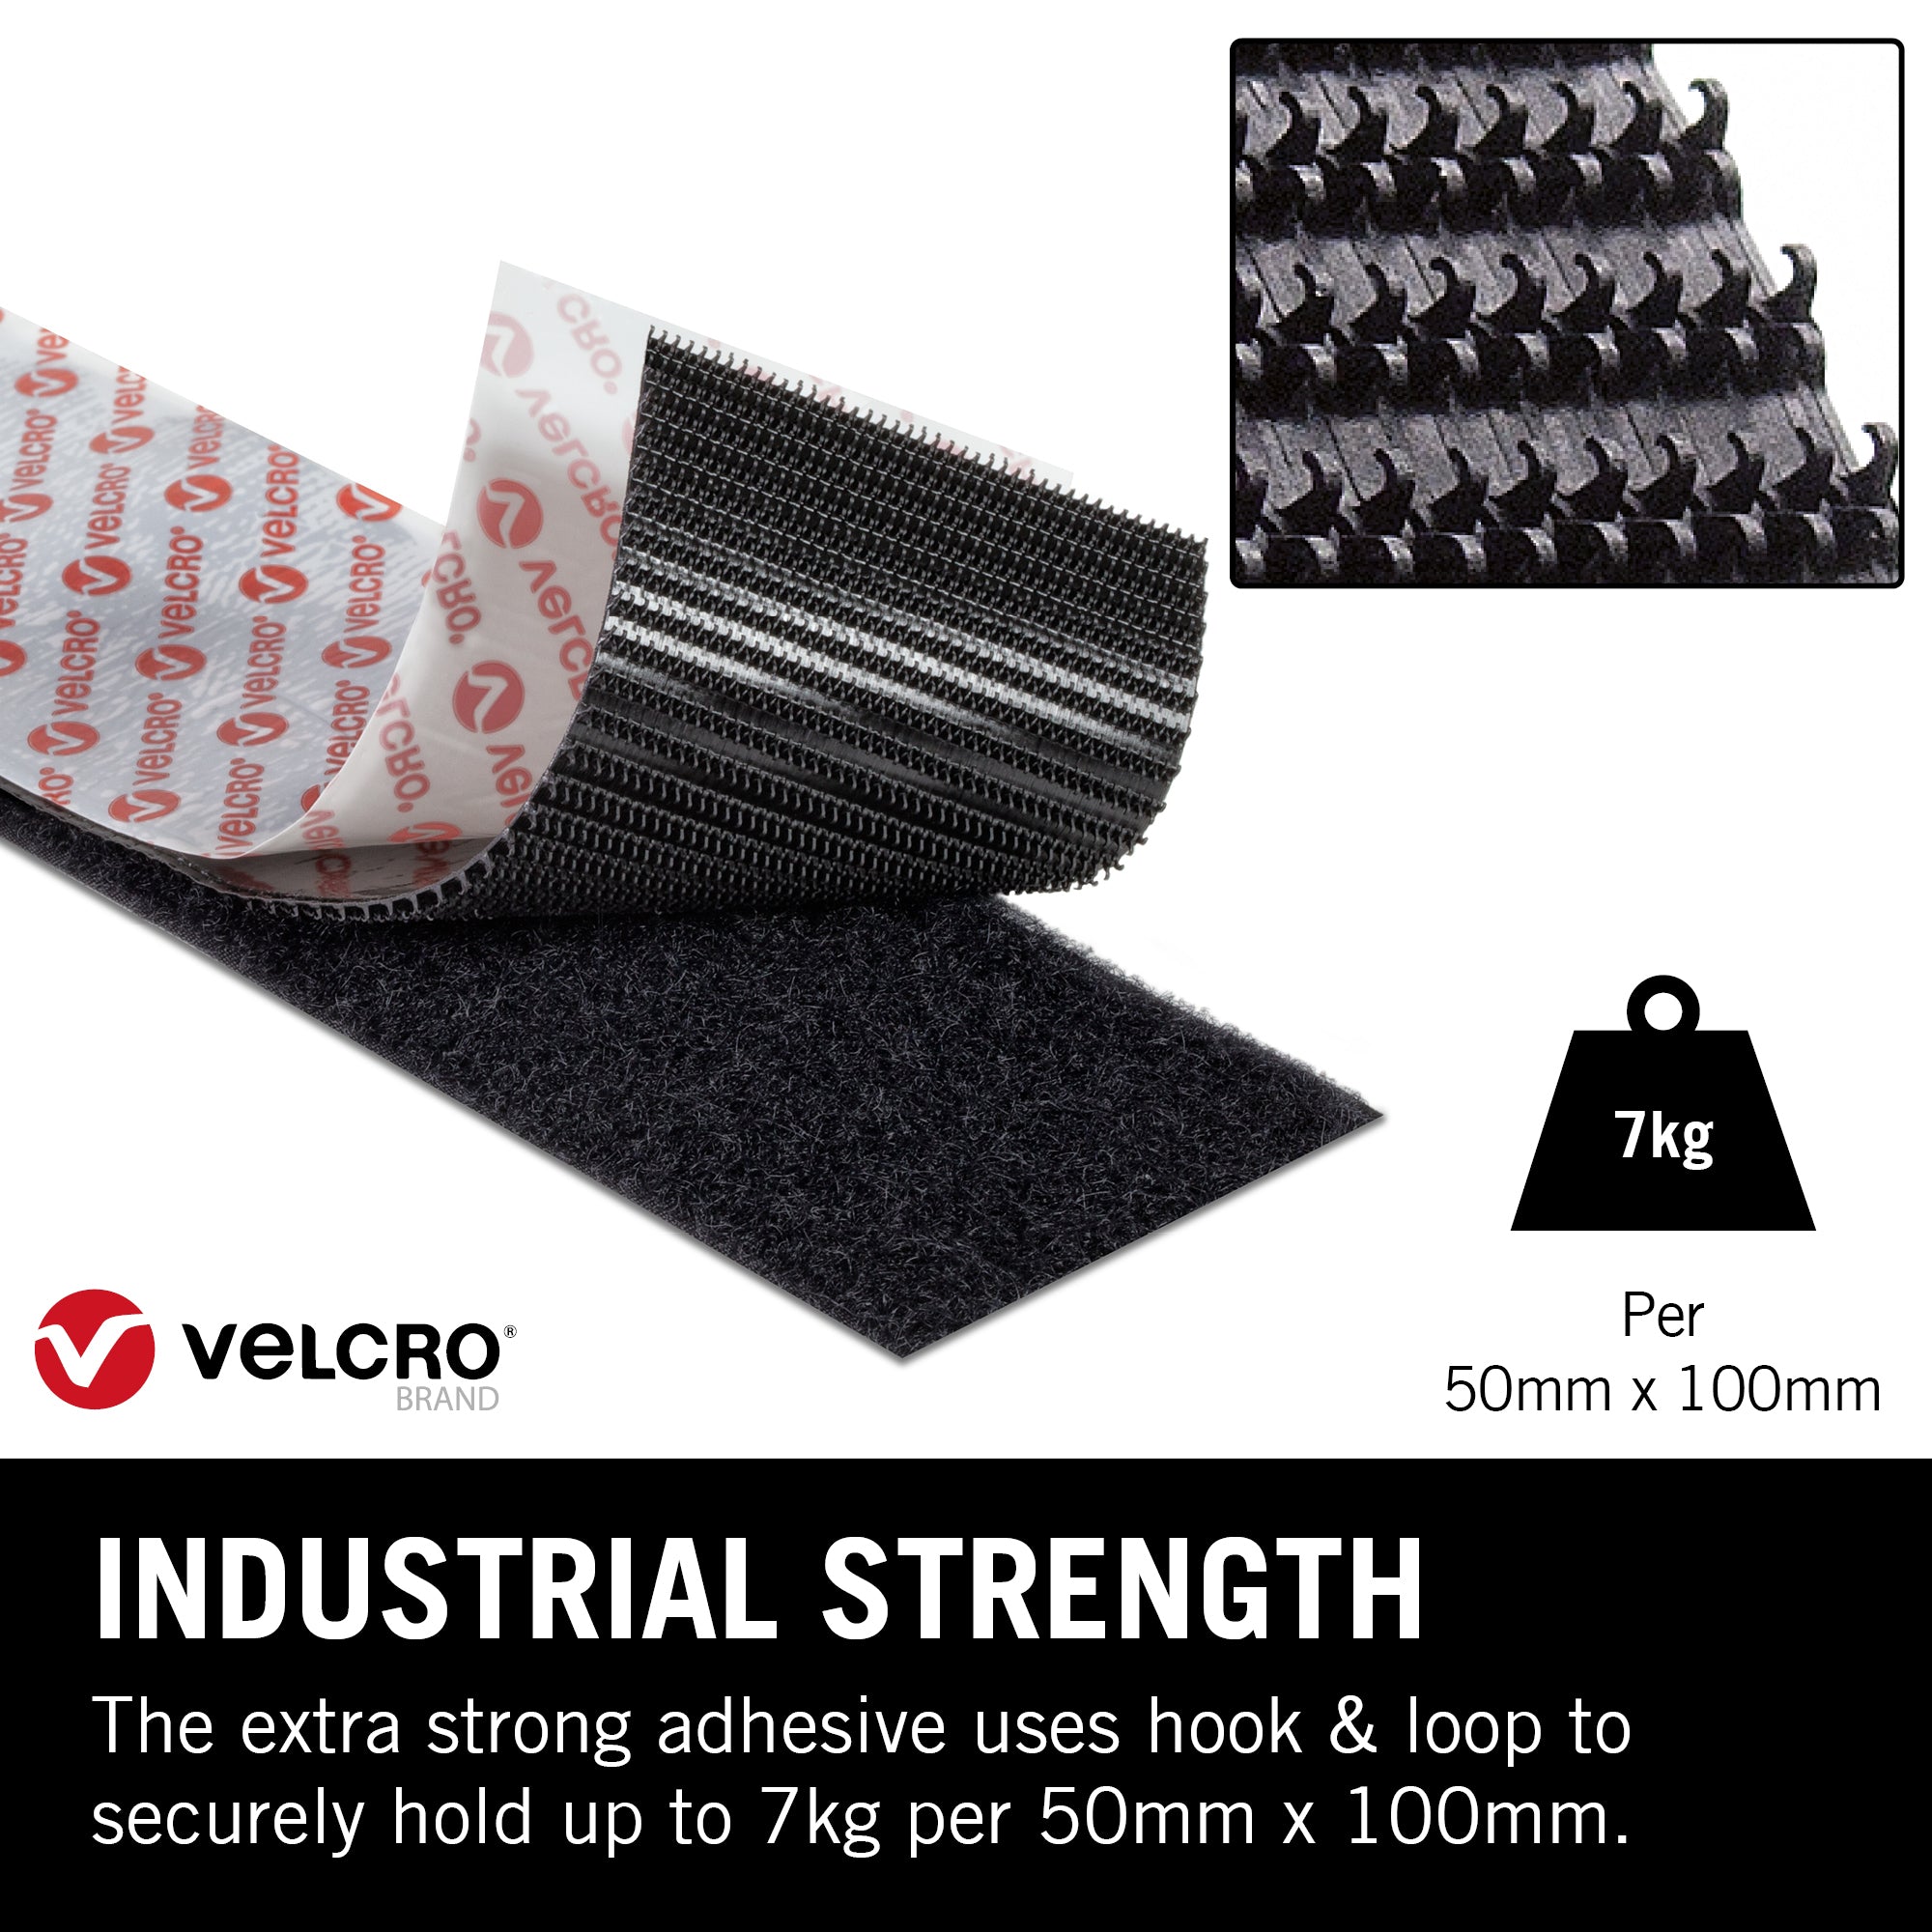  VELCRO Brand Heavy Duty Tape with Adhesive, 15 Ft x 2 in, Holds 10 lbs, Black & Heavy Duty Tape, 16 Foot Roll